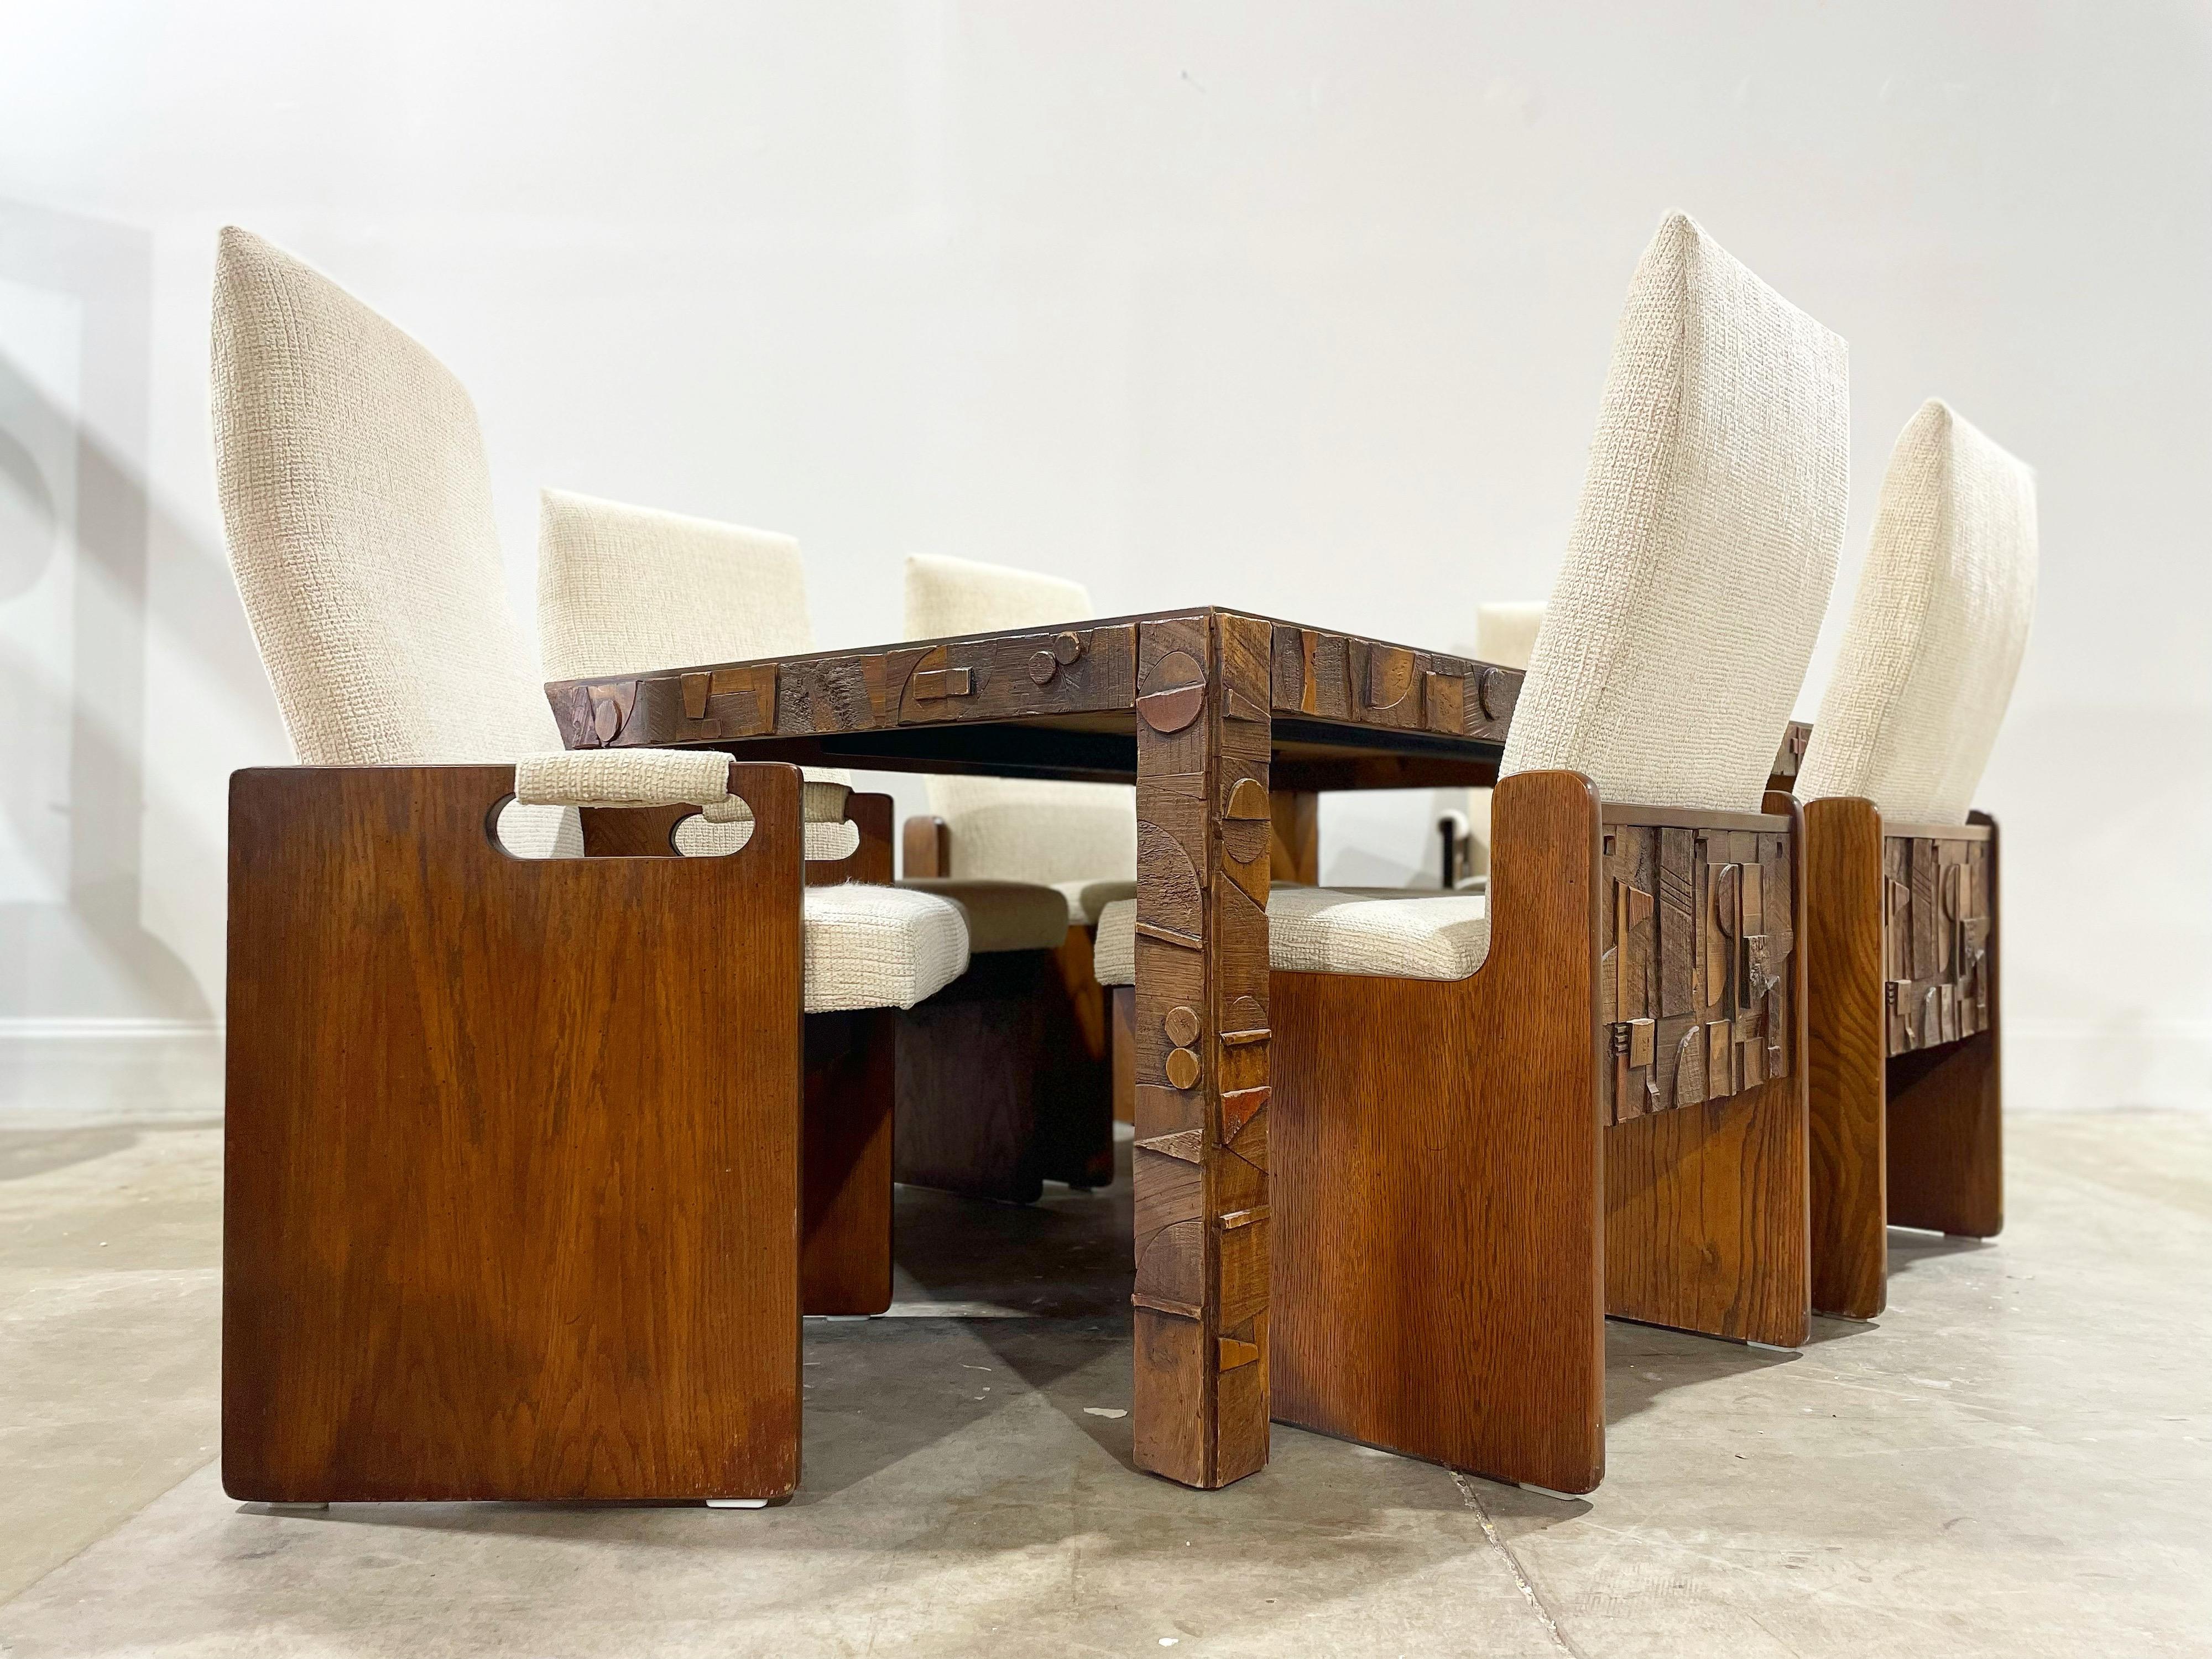 Remarkable mid century Brutalist dining set in the style of Paul Evans, Produced by Lane in the 1970's for their 